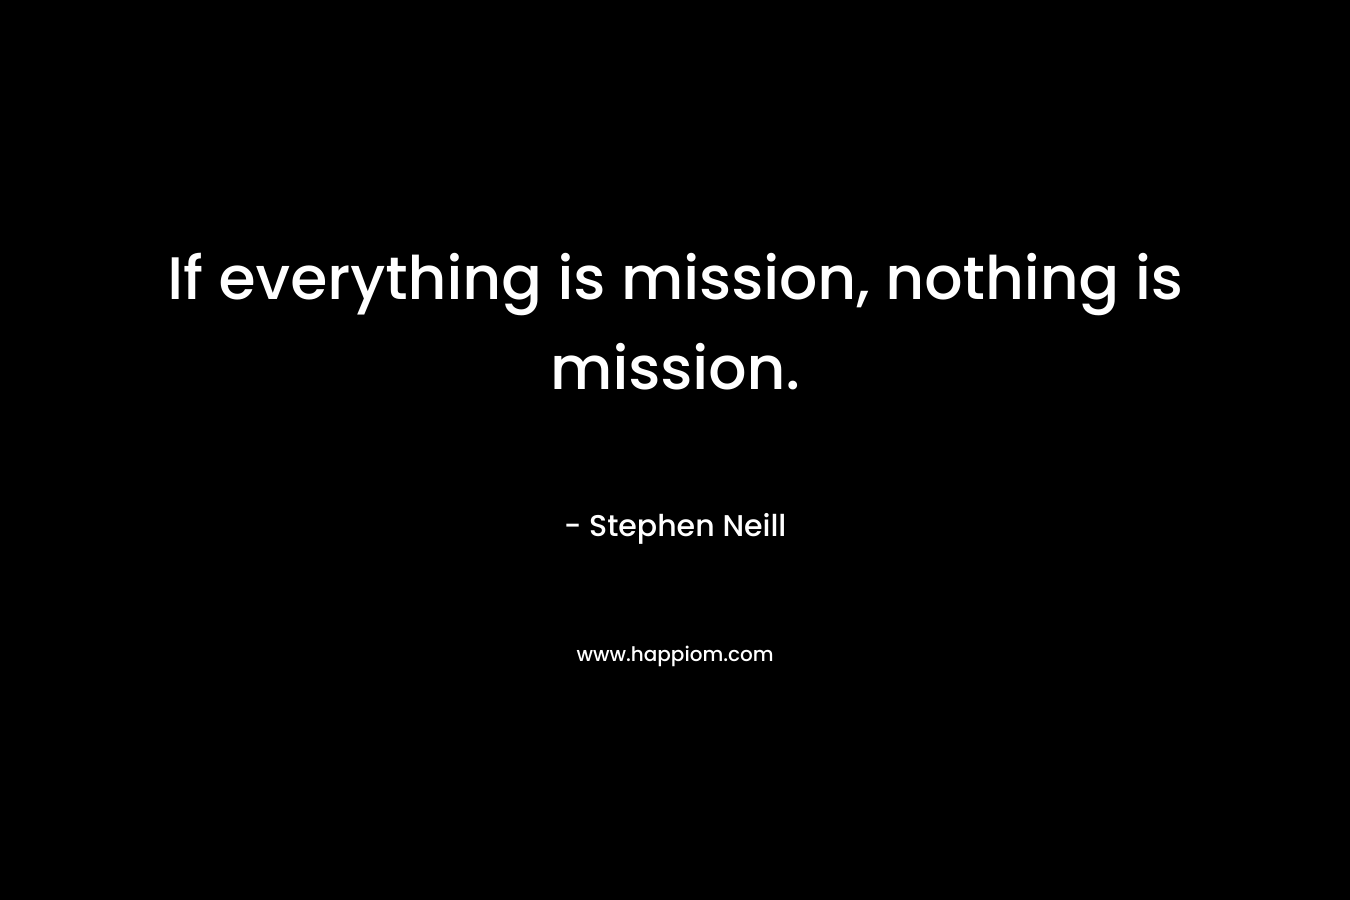 If everything is mission, nothing is mission.